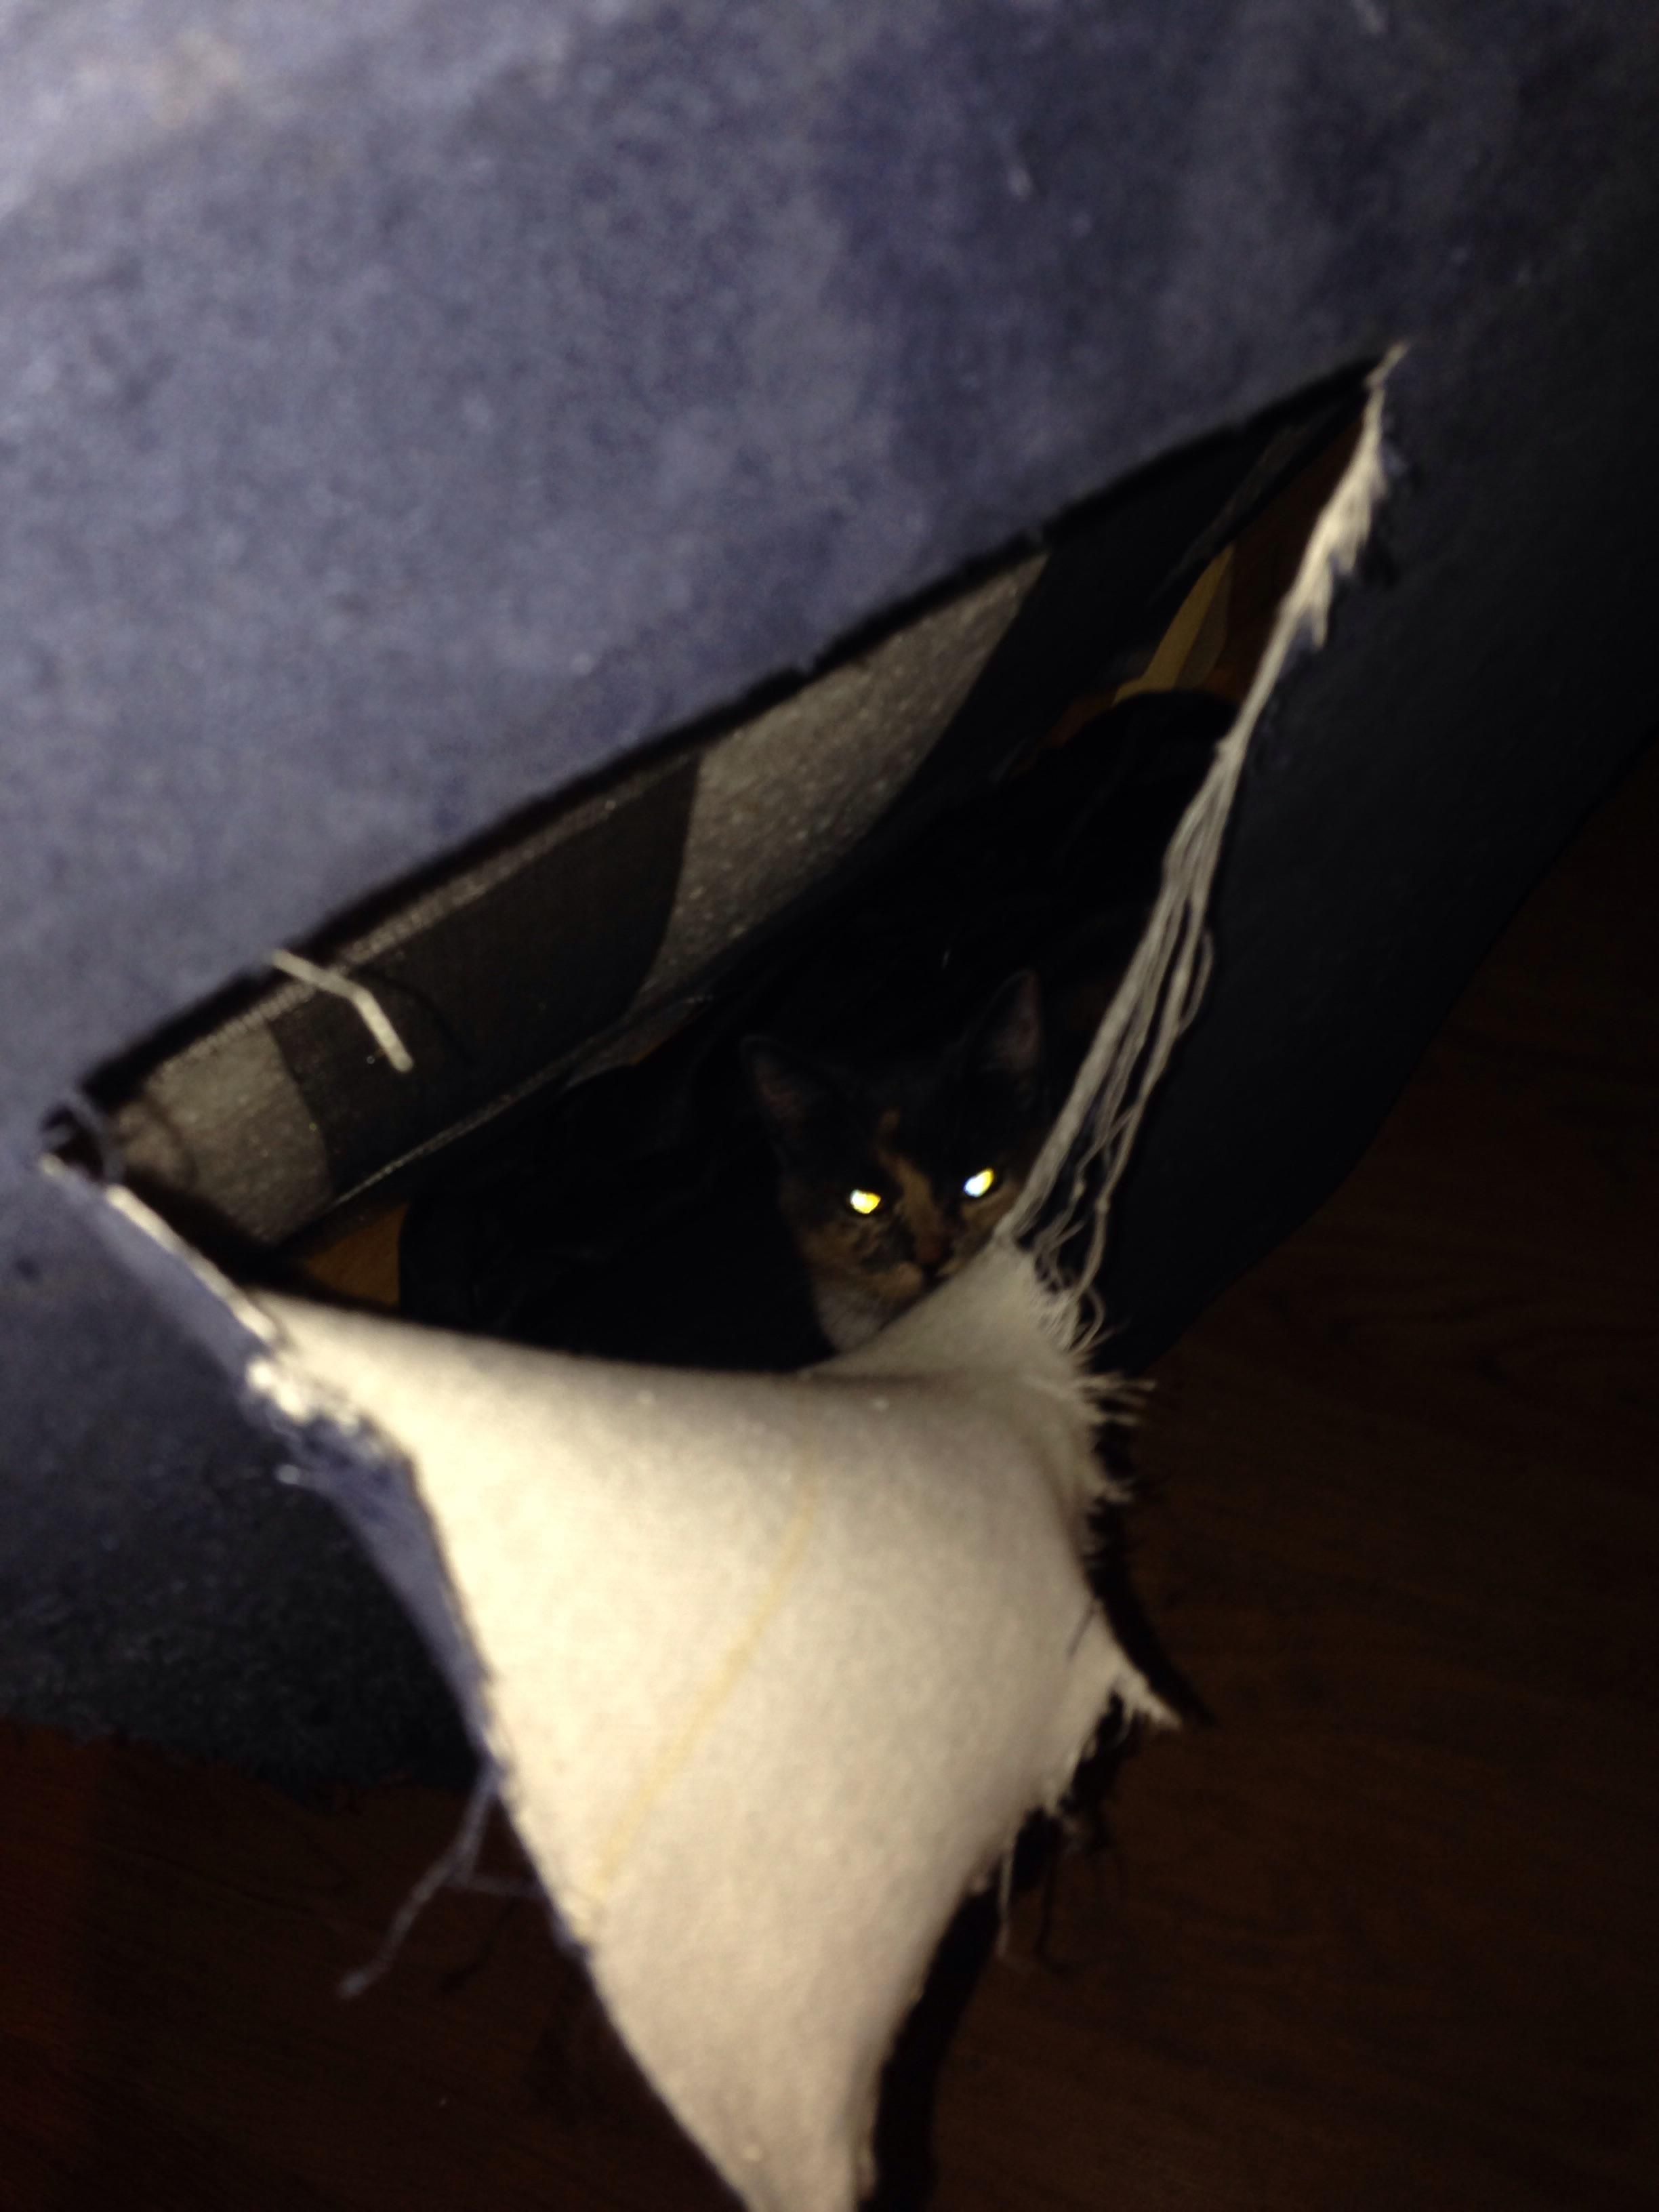 Bought a couch from Craigslist, heard noises coming from it after bringing it home. Cut it open and found a cat